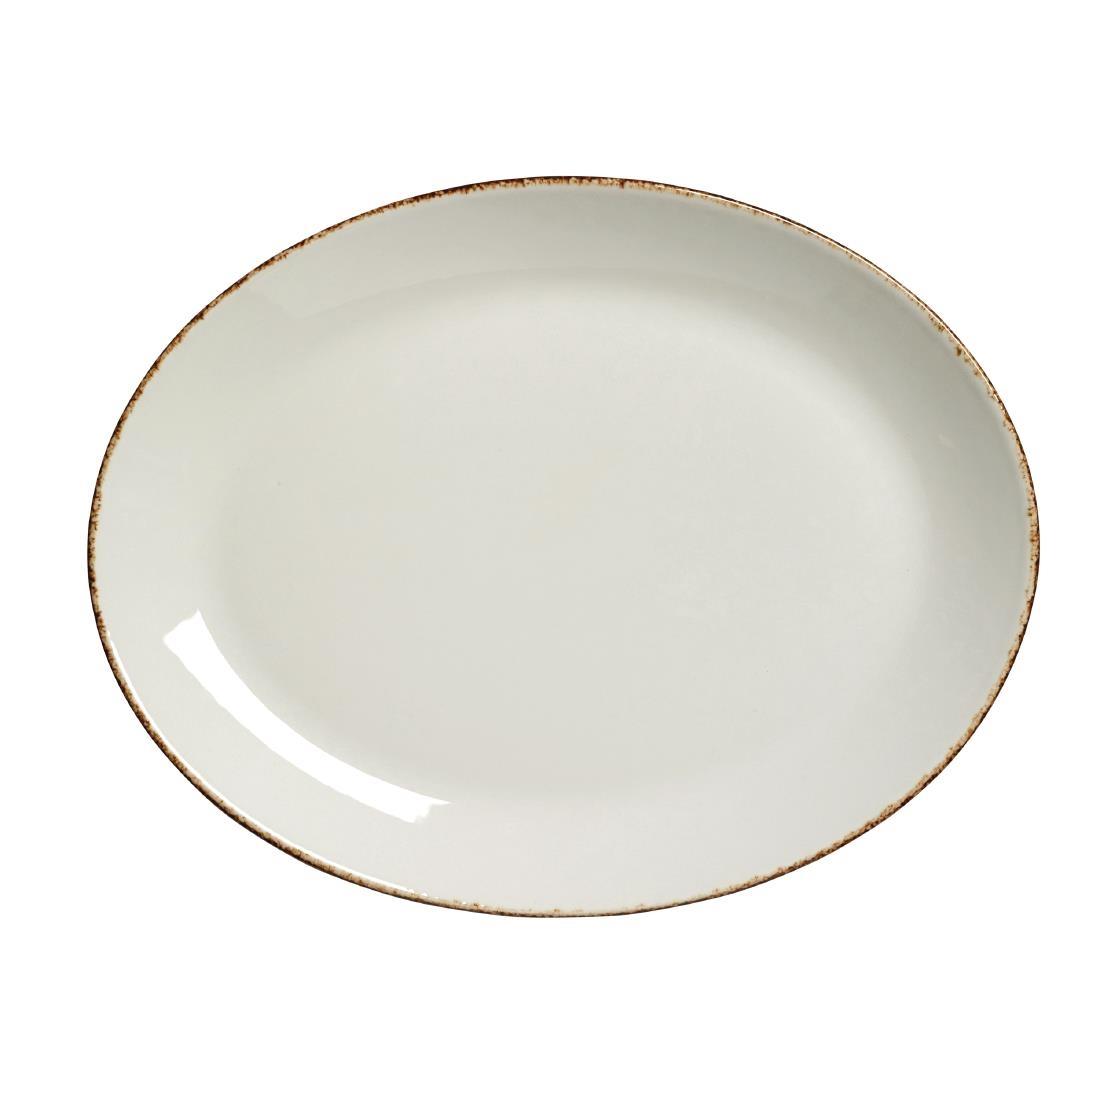 Steelite Brown Dapple Oval Coupe Plates 305mm (Pack of 12) - VV1317  - 1